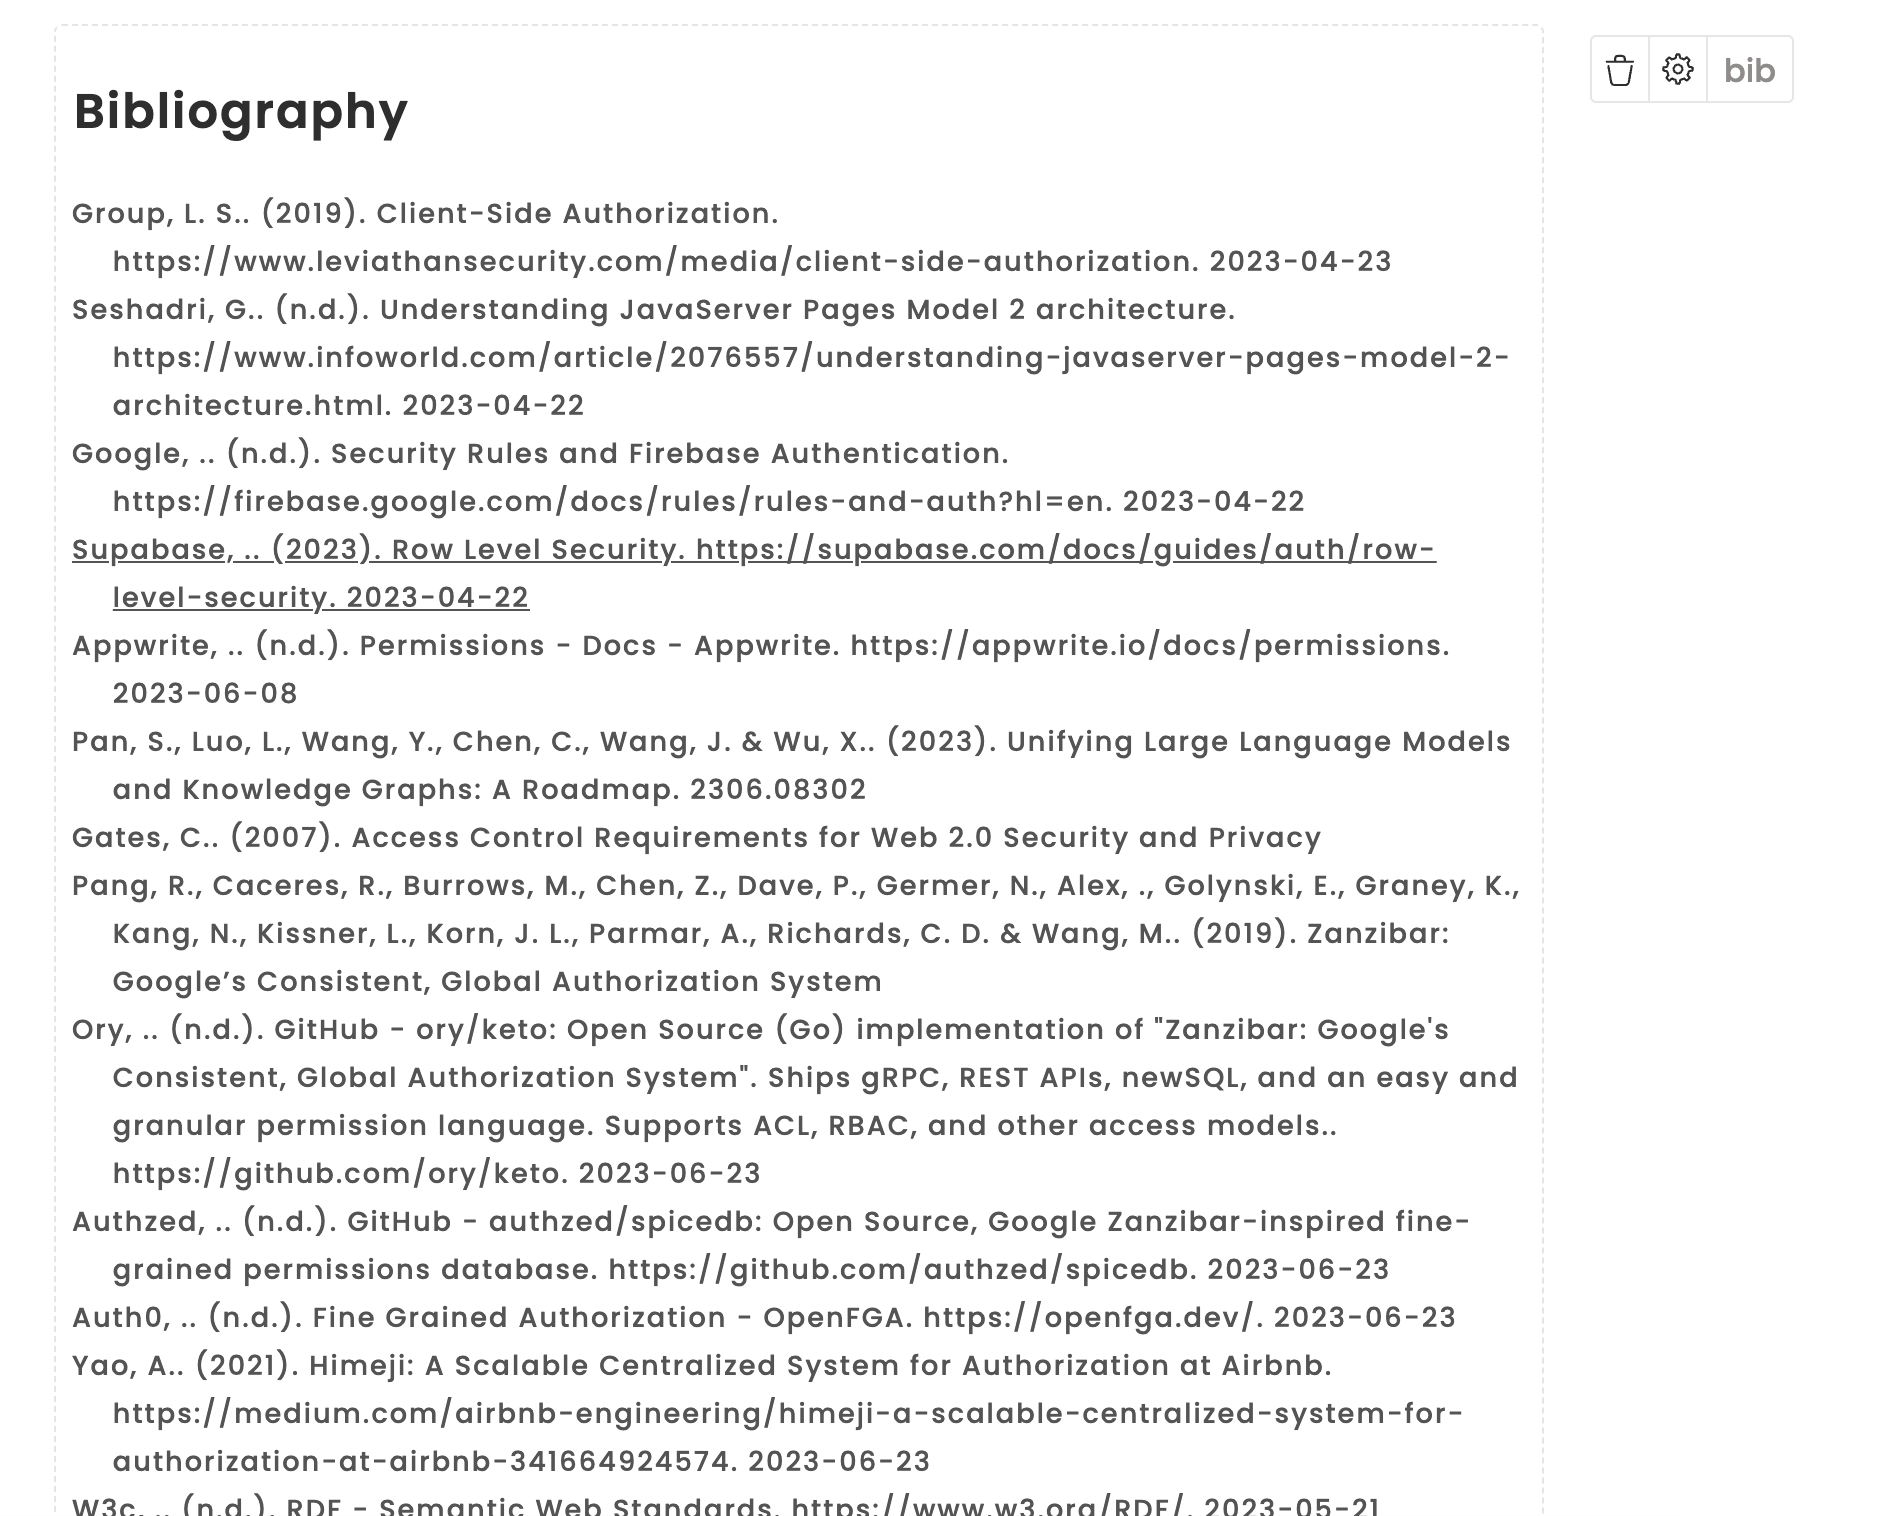 A screenshot showing the bibliography added to the the MonsterWriter editor